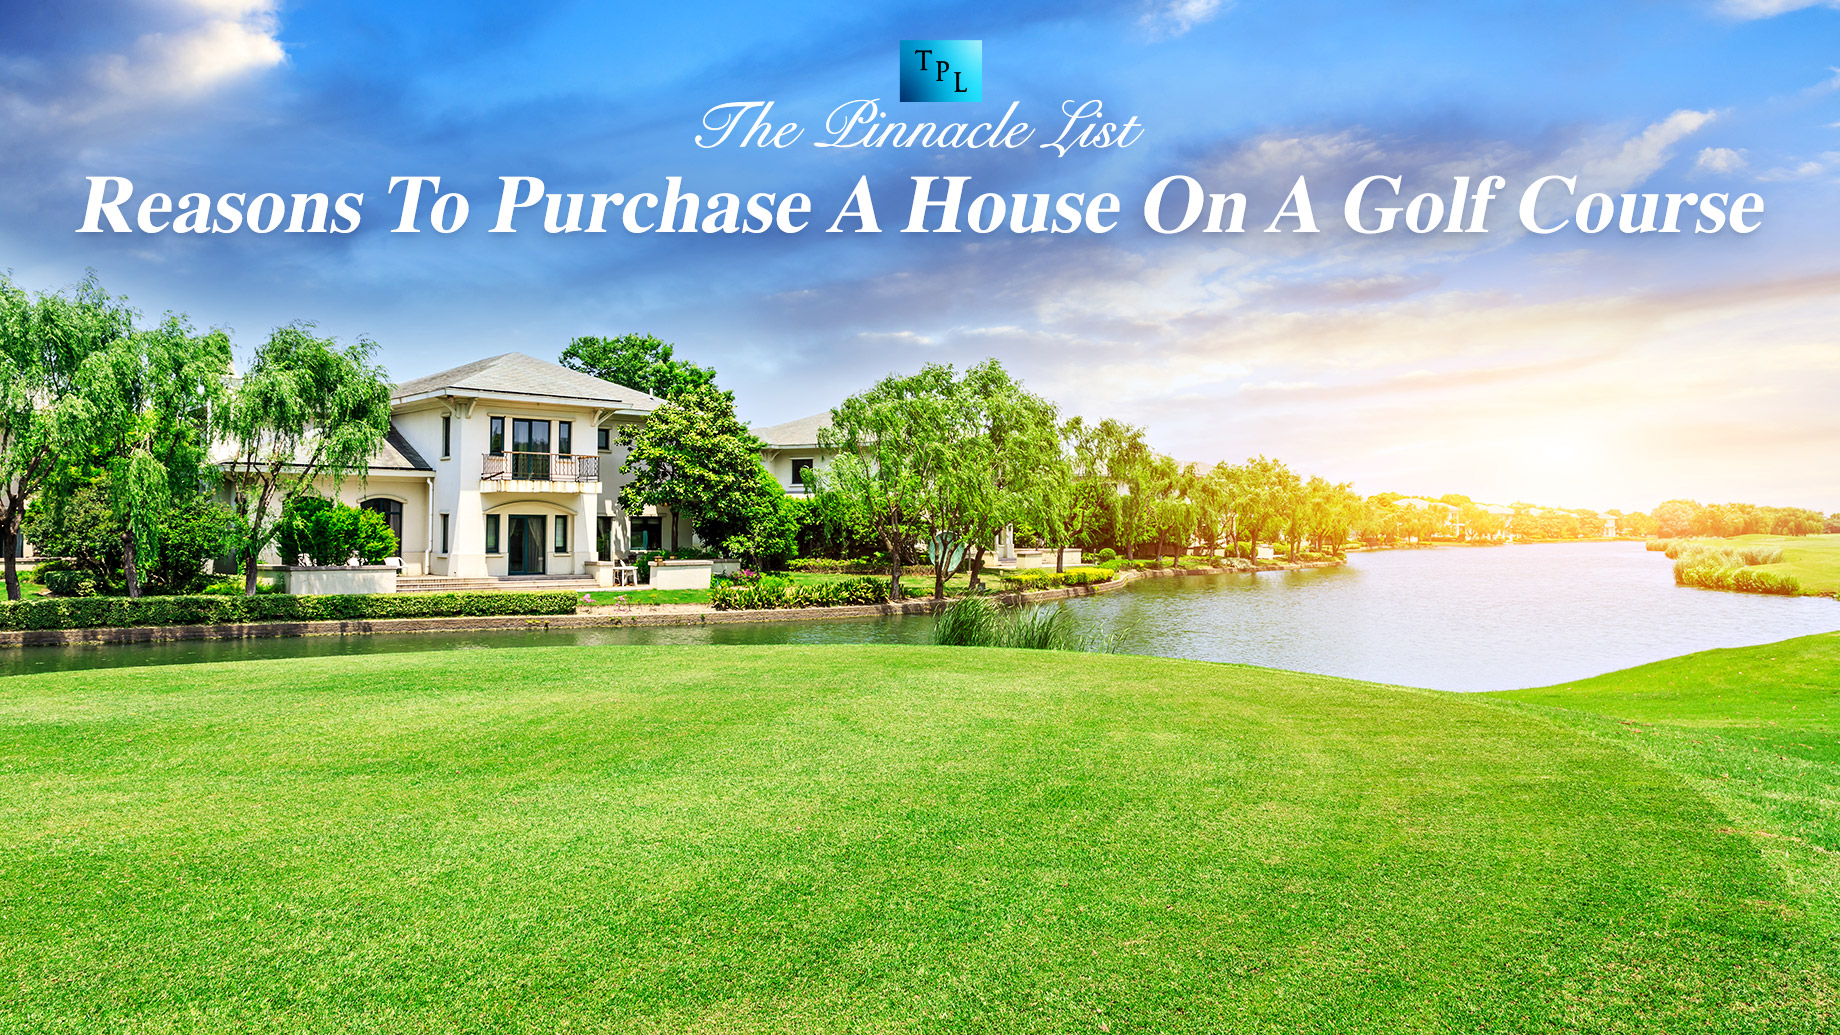 Reasons To Purchase A House On A Golf Course